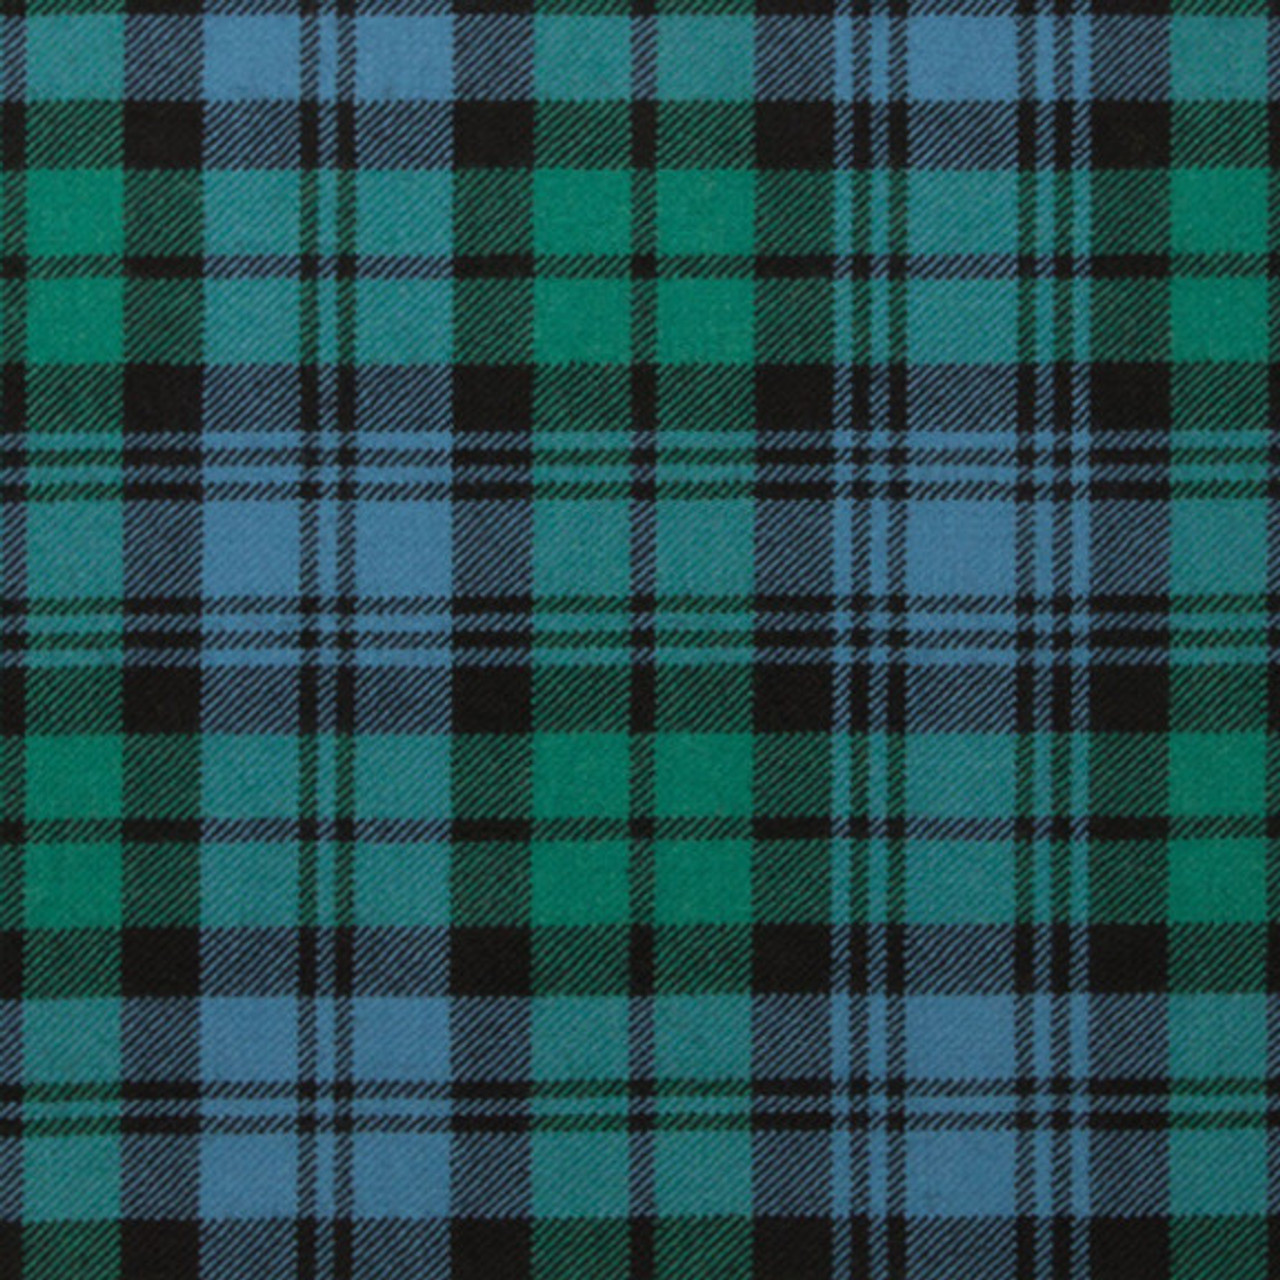 Campbell Ancient Plaid Fabric